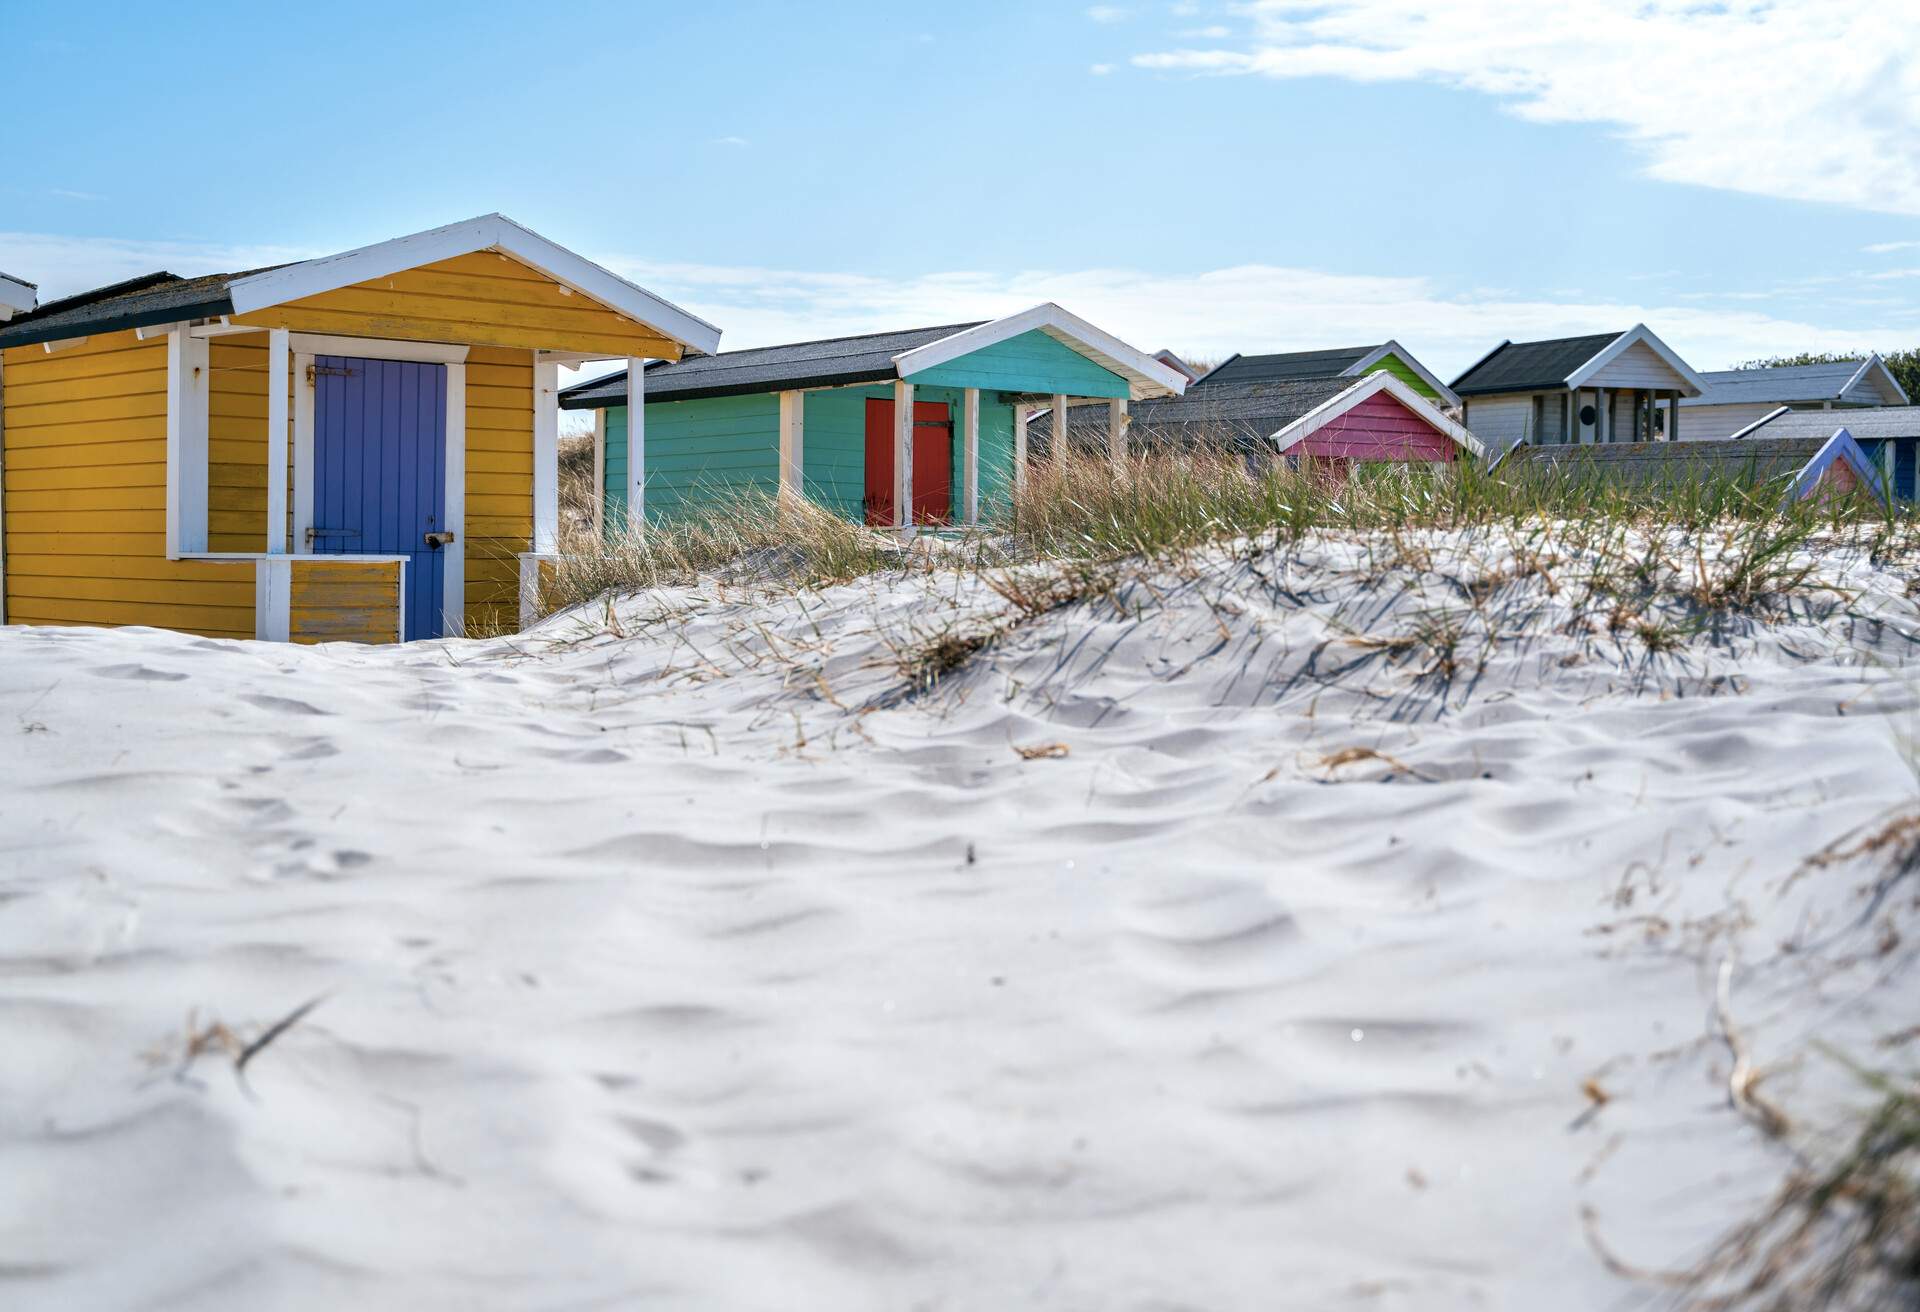 Beach huts or bath cottages on Skanor beach dunes and Falsterbo in South Sweden, Skane travel destination. Domestic tourism concept